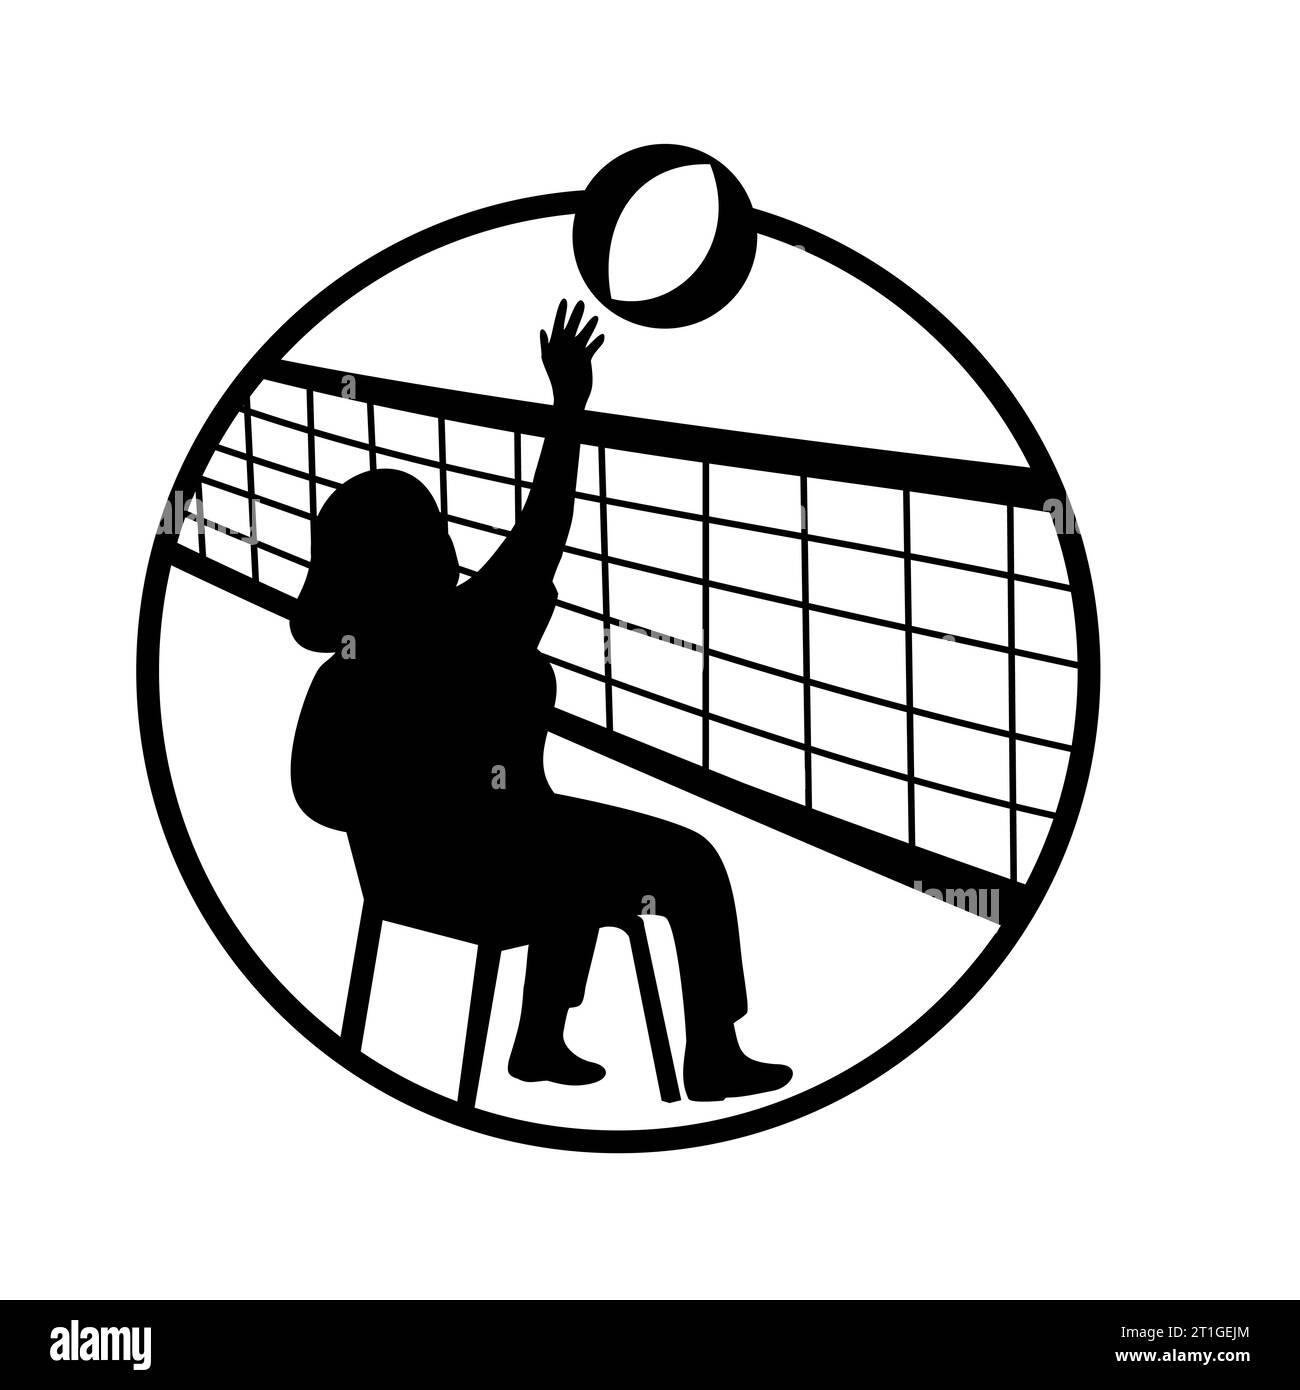 Mascot illustration of female senior chair volleyball player spiking the ball over net on isolated white background inside circle in retro black and w Stock Photo